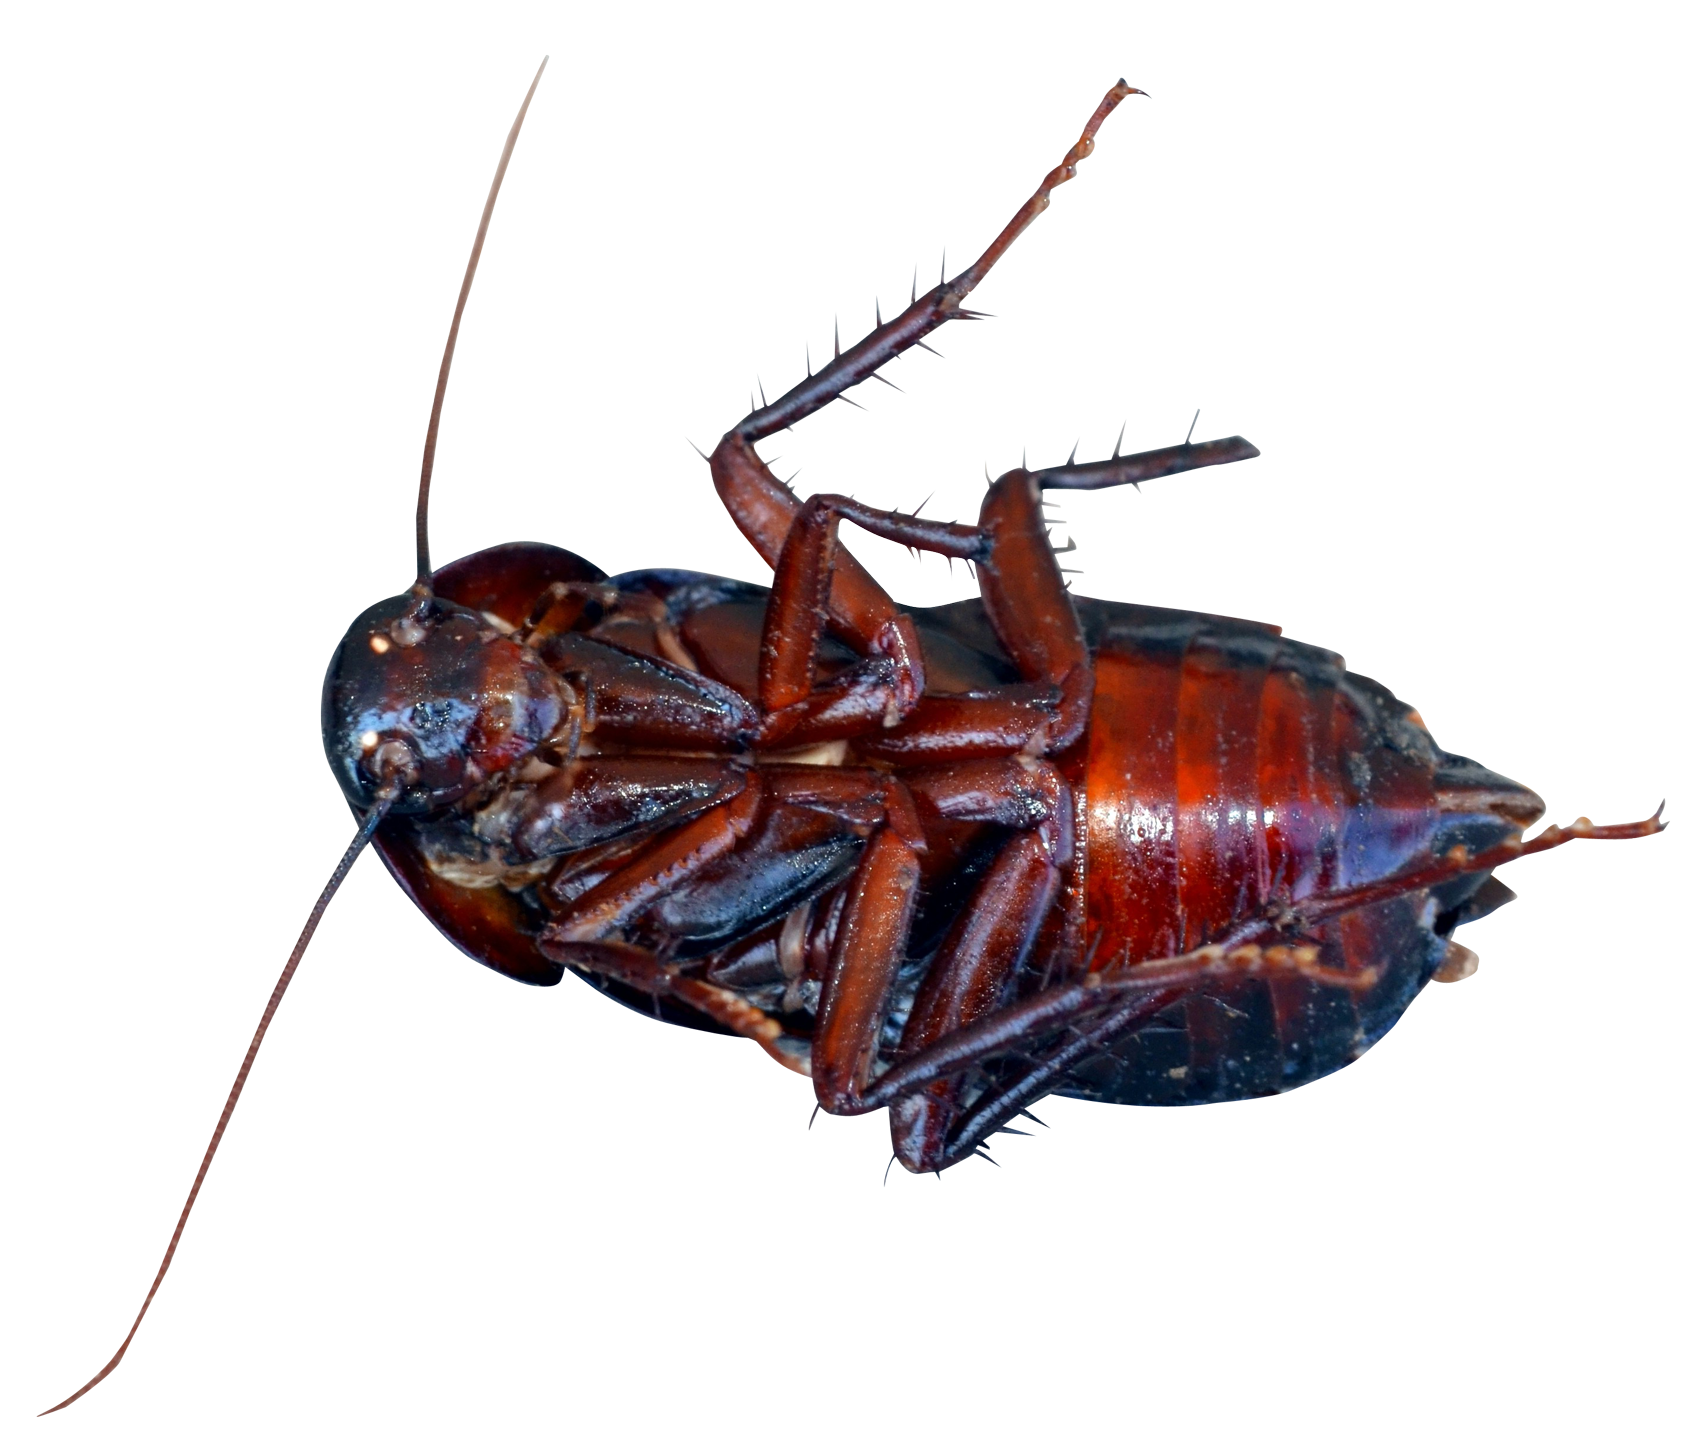 Cockroach PNG Image